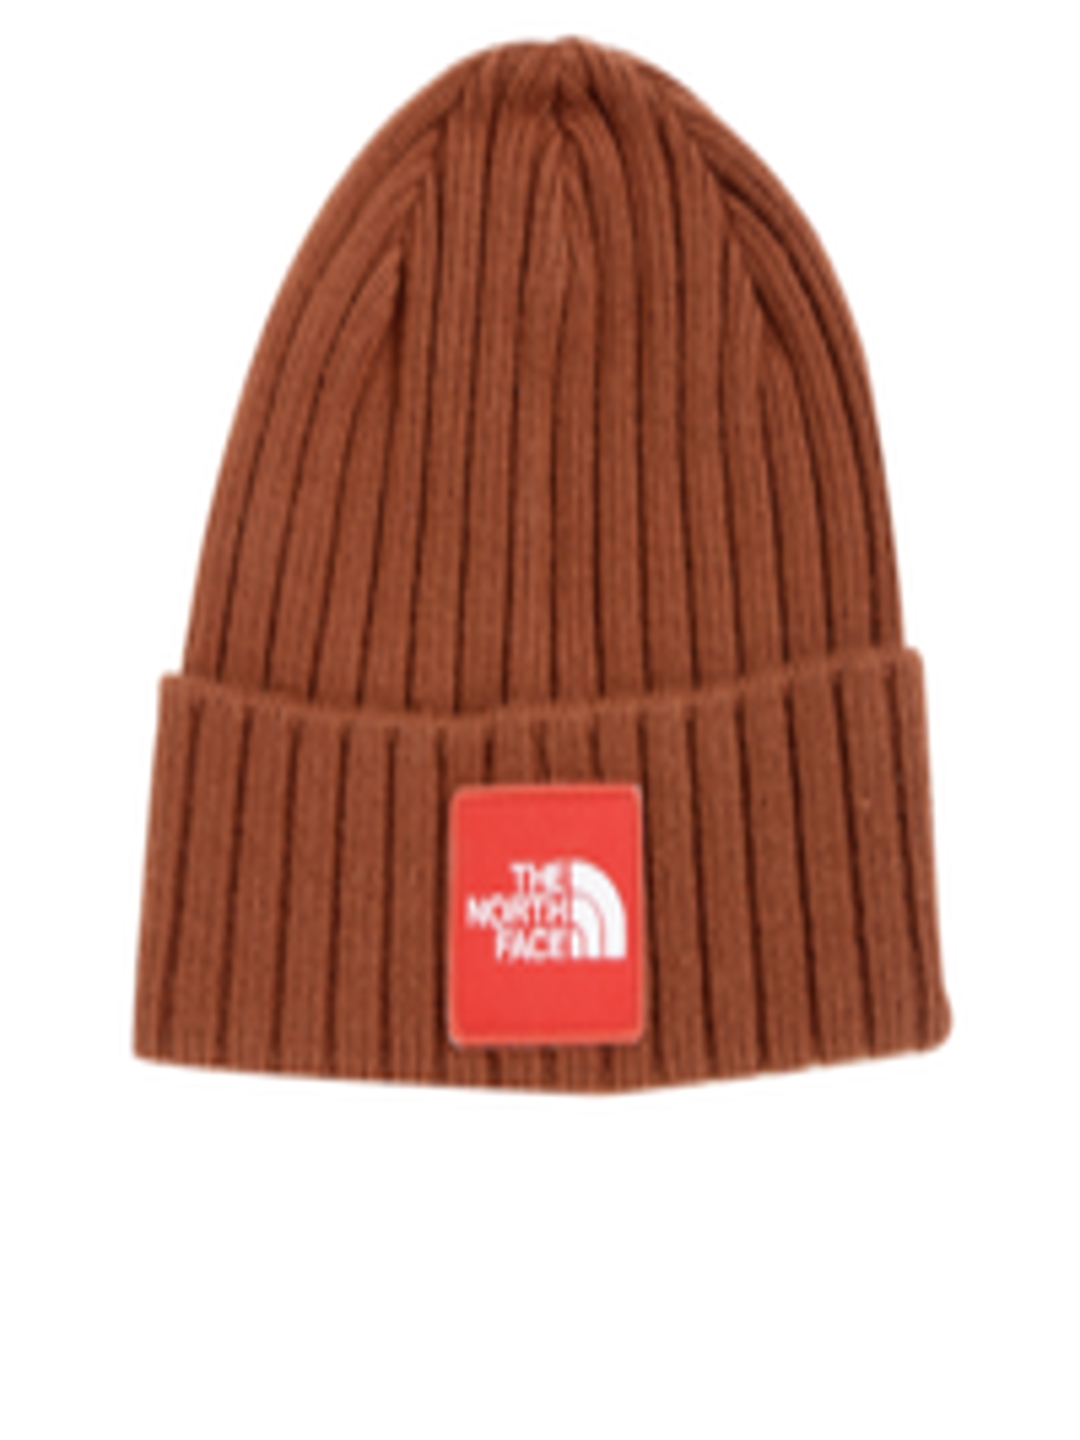 Buy The North Face Unisex Brown CLASSIC CUFFED Beanie - Caps for Unisex